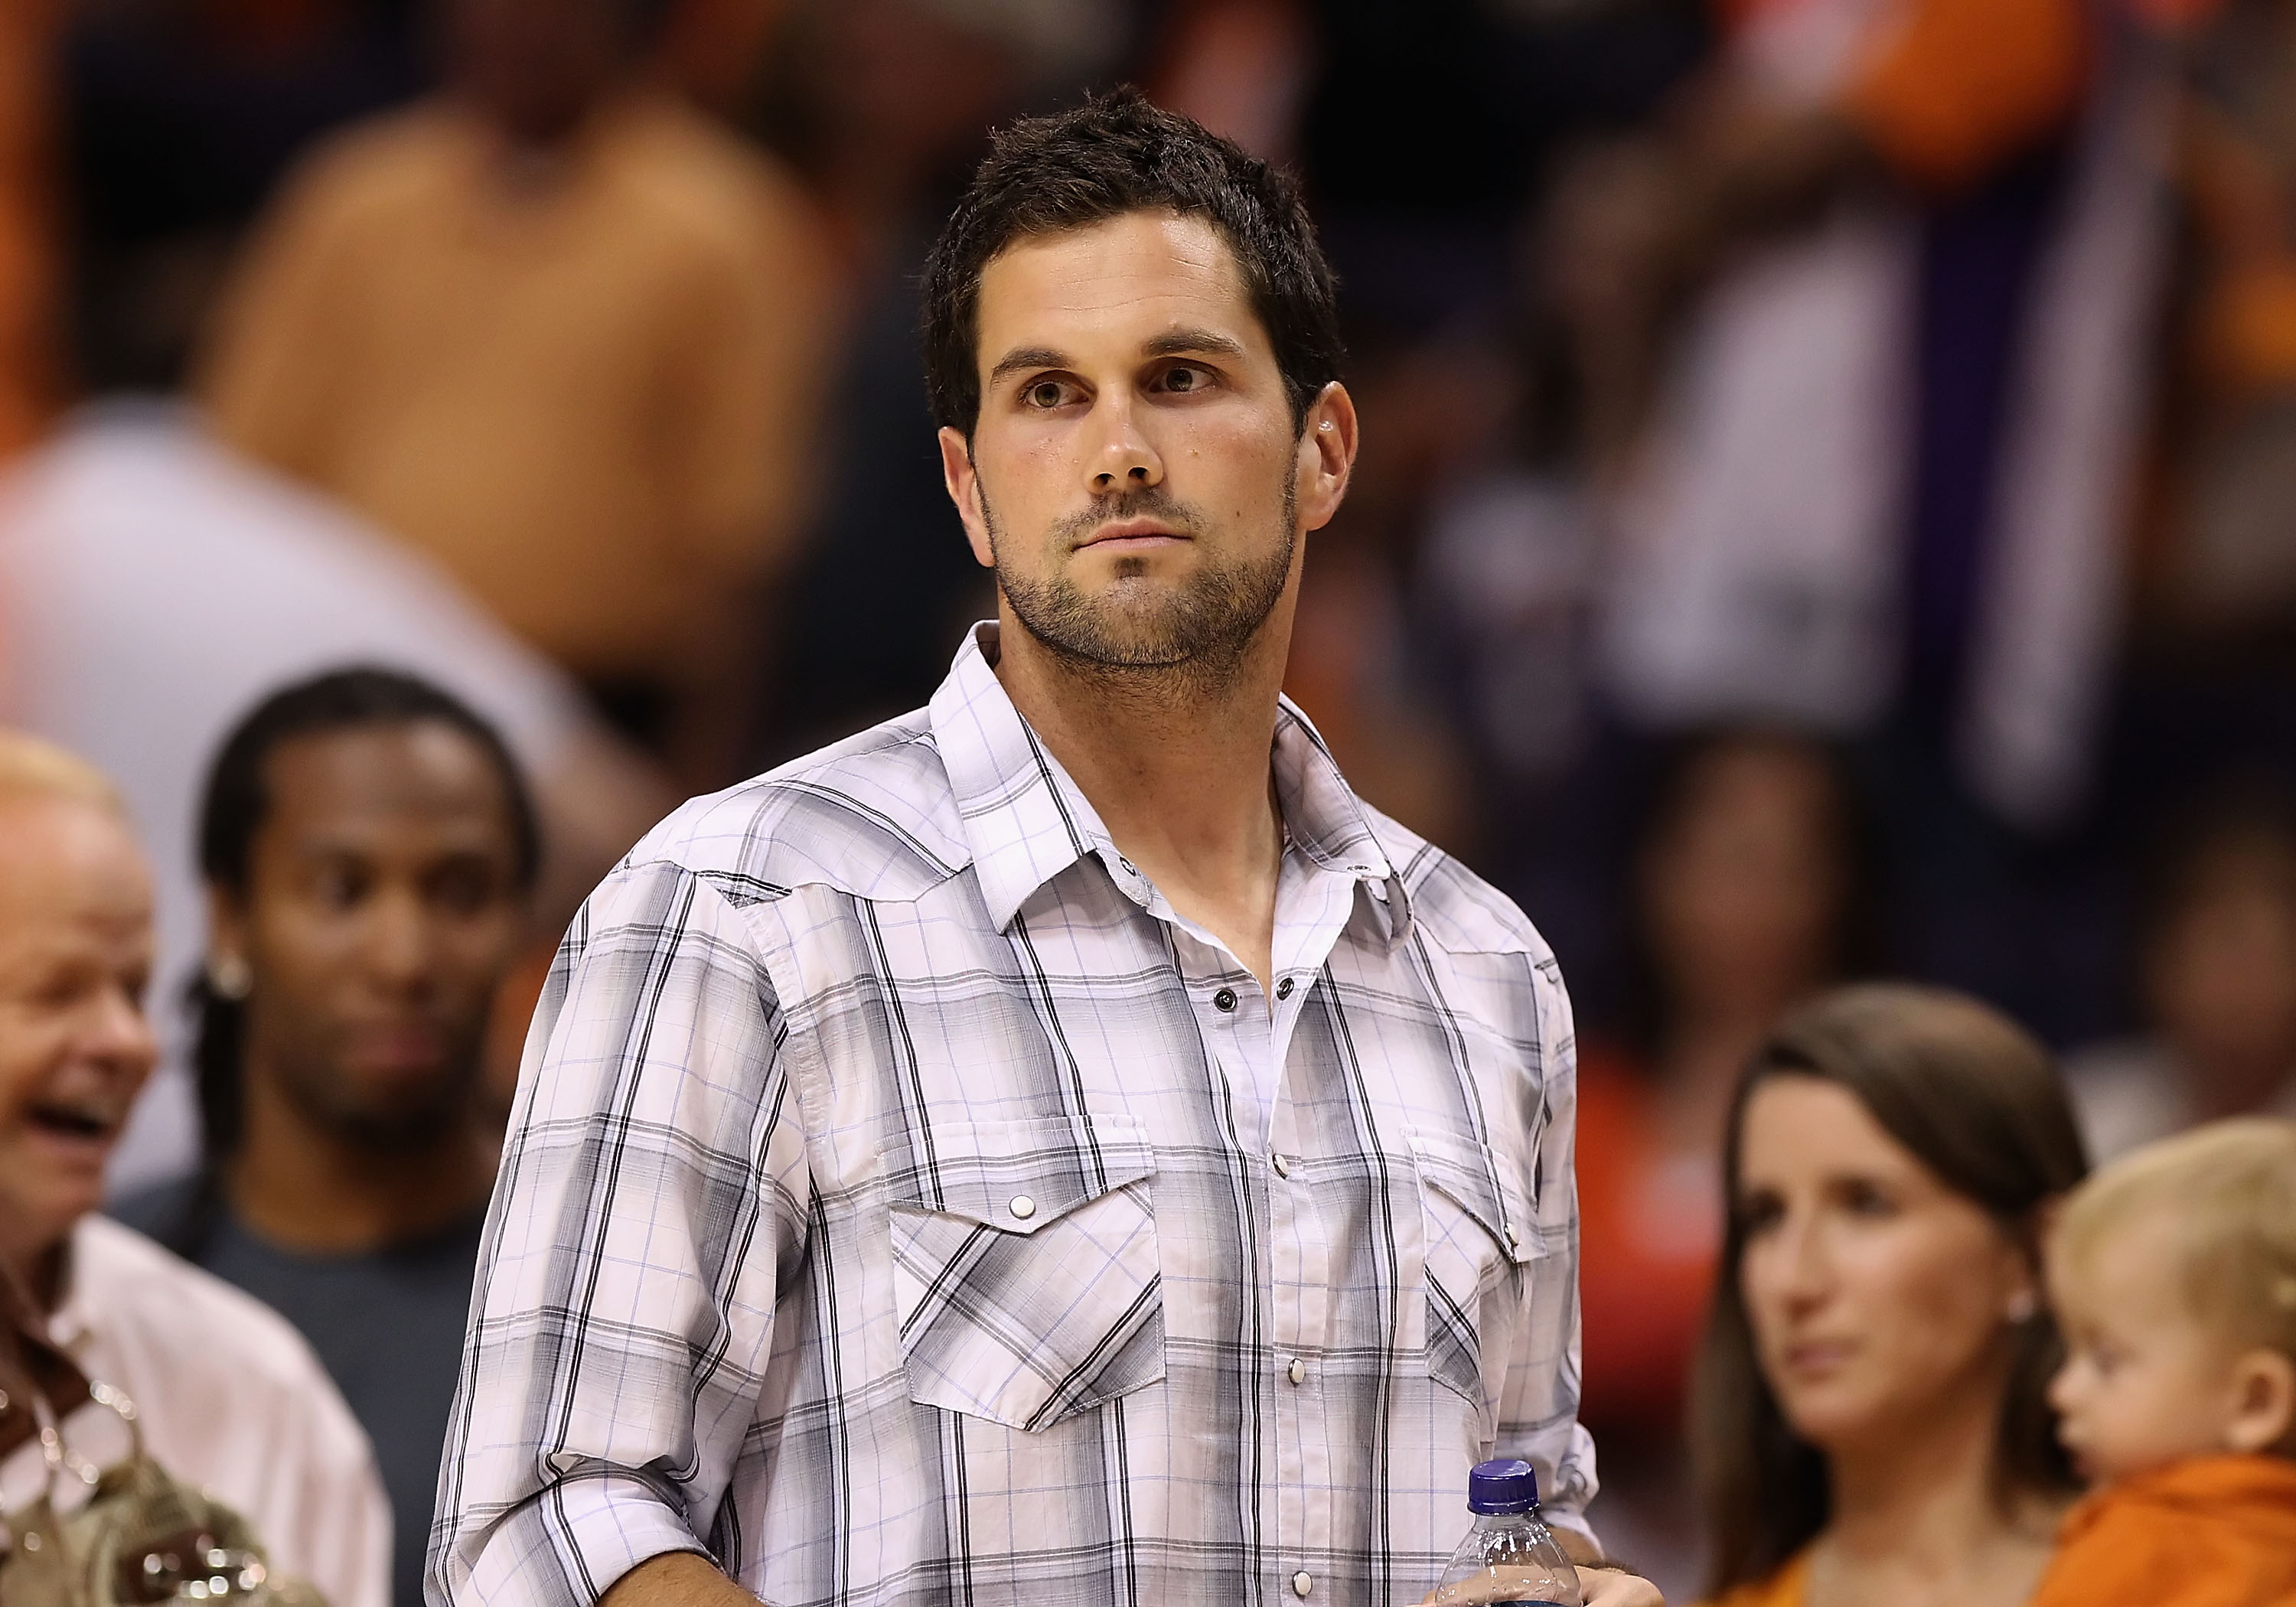 PHOENIX - MAY 25:  Arizona Cardinals quarterback Matt Leinart attends Game Four of the Western Conference finals of the 2010 NBA Playoffs between the Los Angeles Lakers and the Phoenix Suns at US Airways Center on May 25, 2010 in Phoenix, Arizona.  The Su